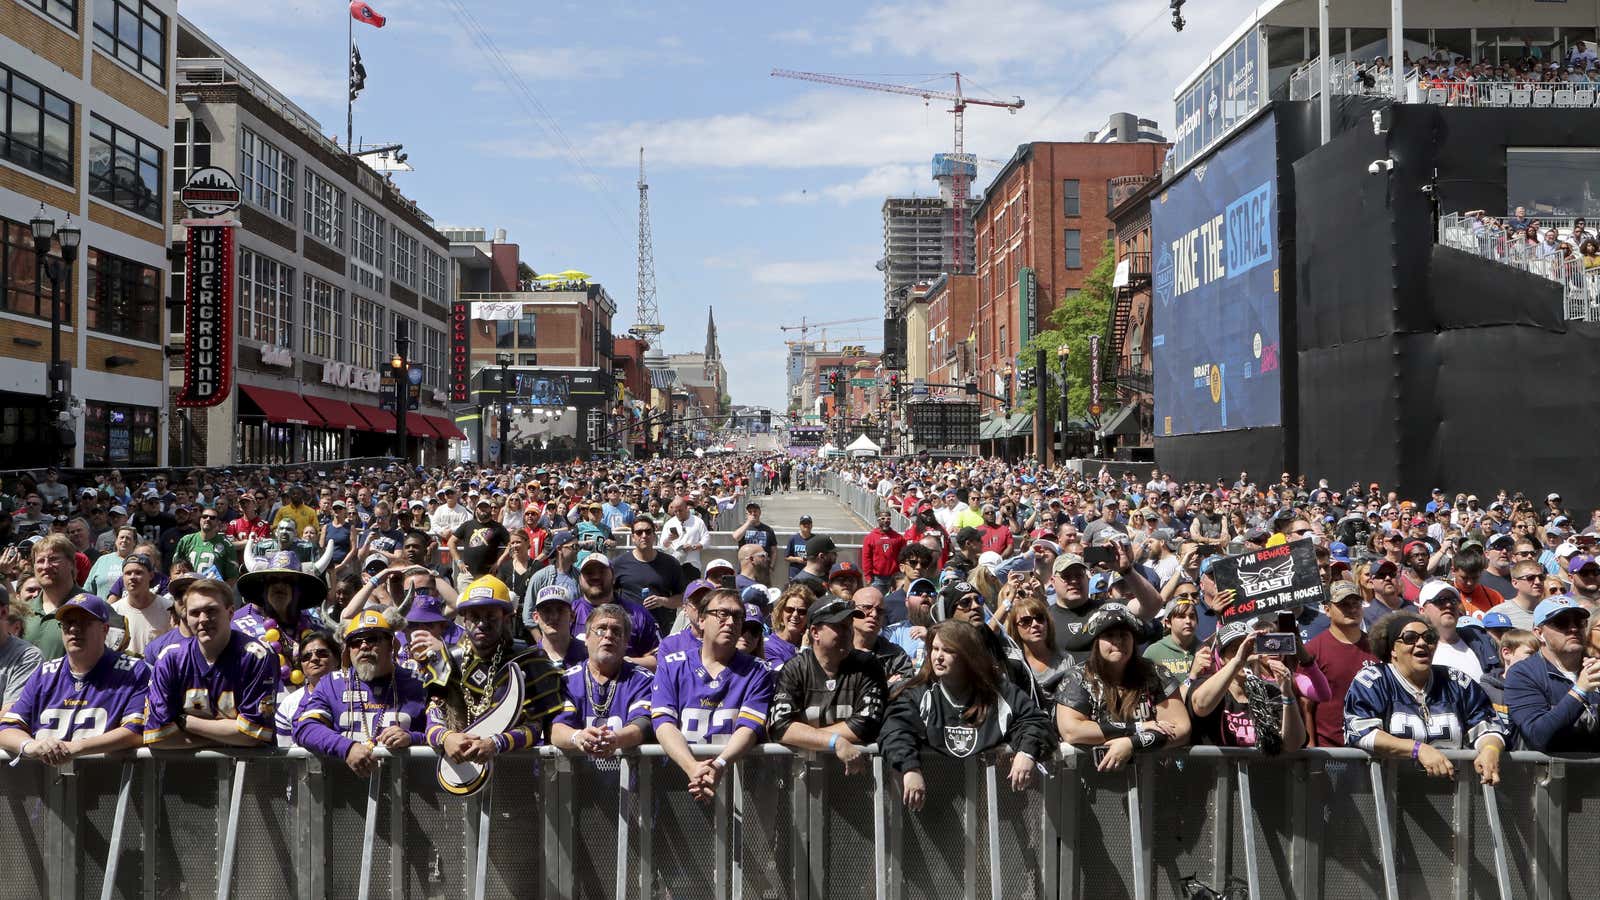 Fans lining up for the NFL Draft: They came for a football spectacle, not a political one.